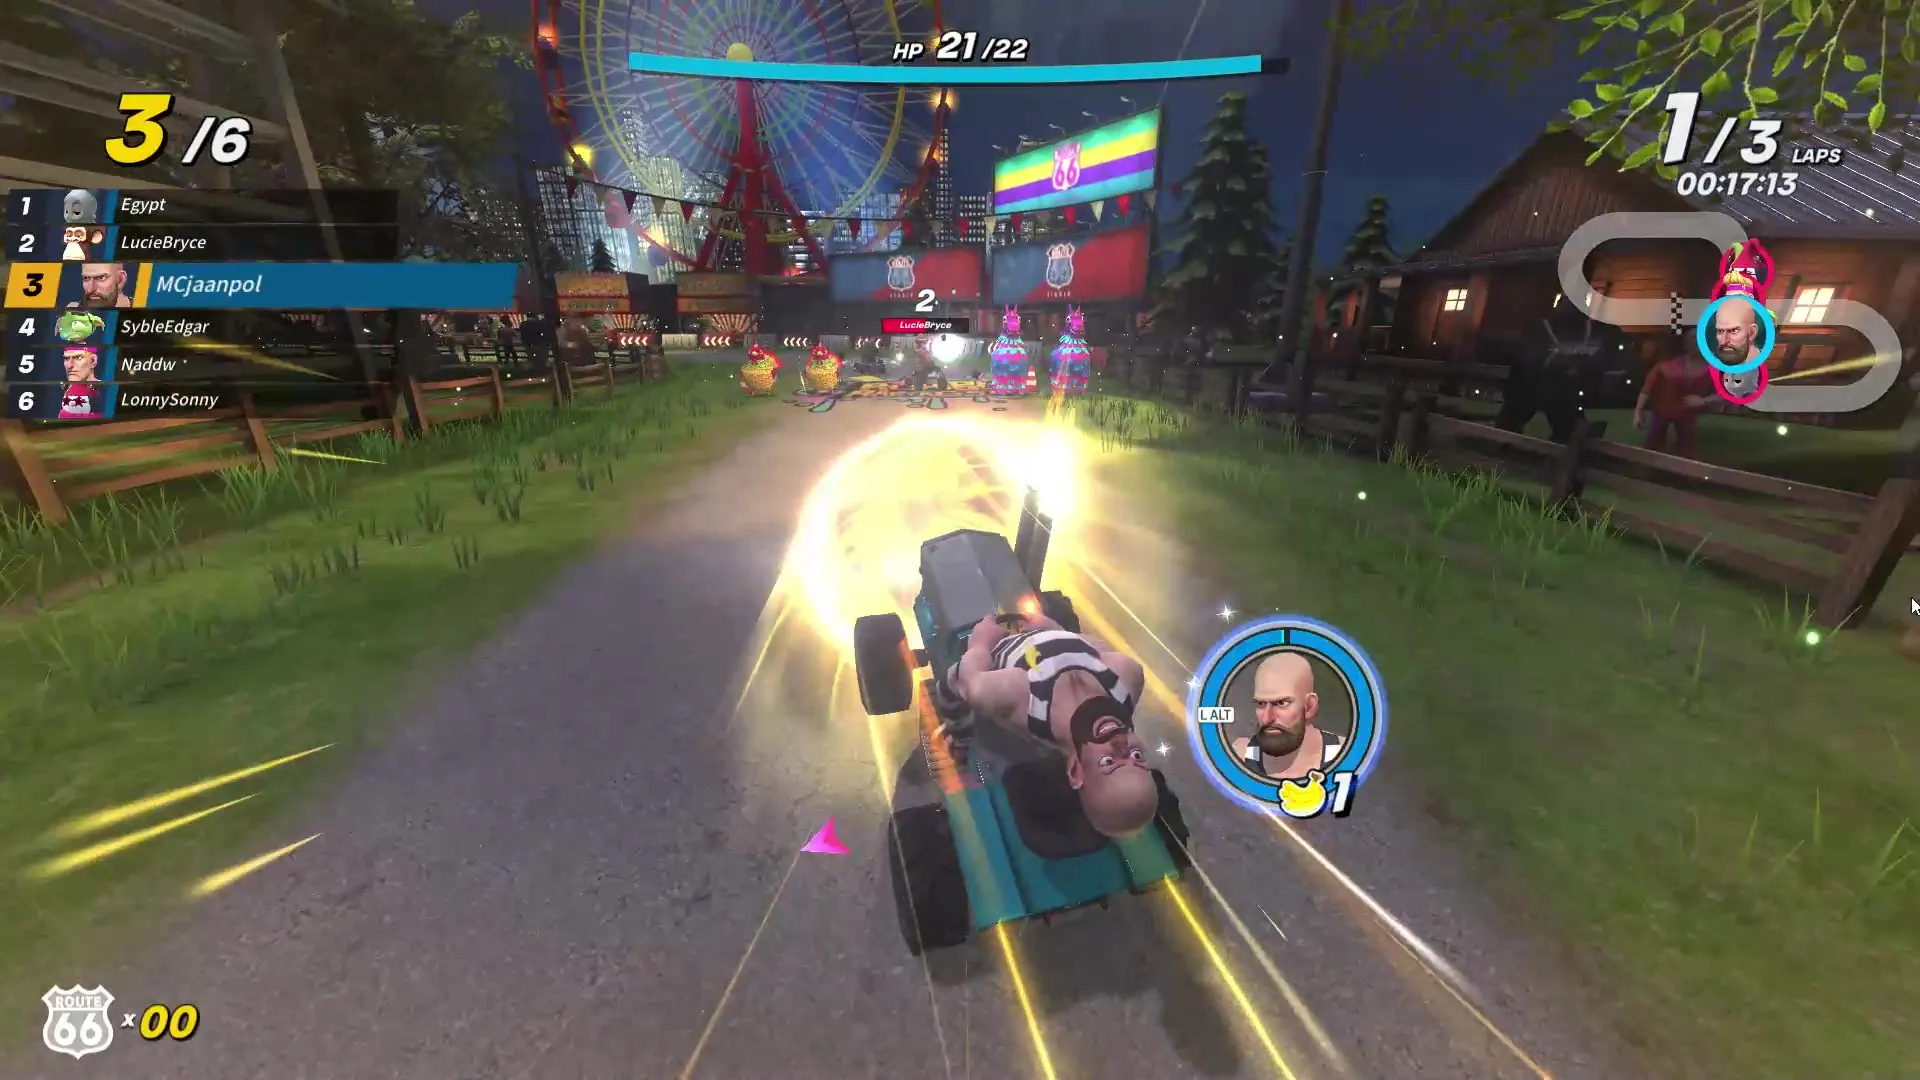 In the game, players can activate the full-speed boost by correctly timing their drifts simultaneously. A yellow boost will appear on your lawnmower, indicating that you have activated it.